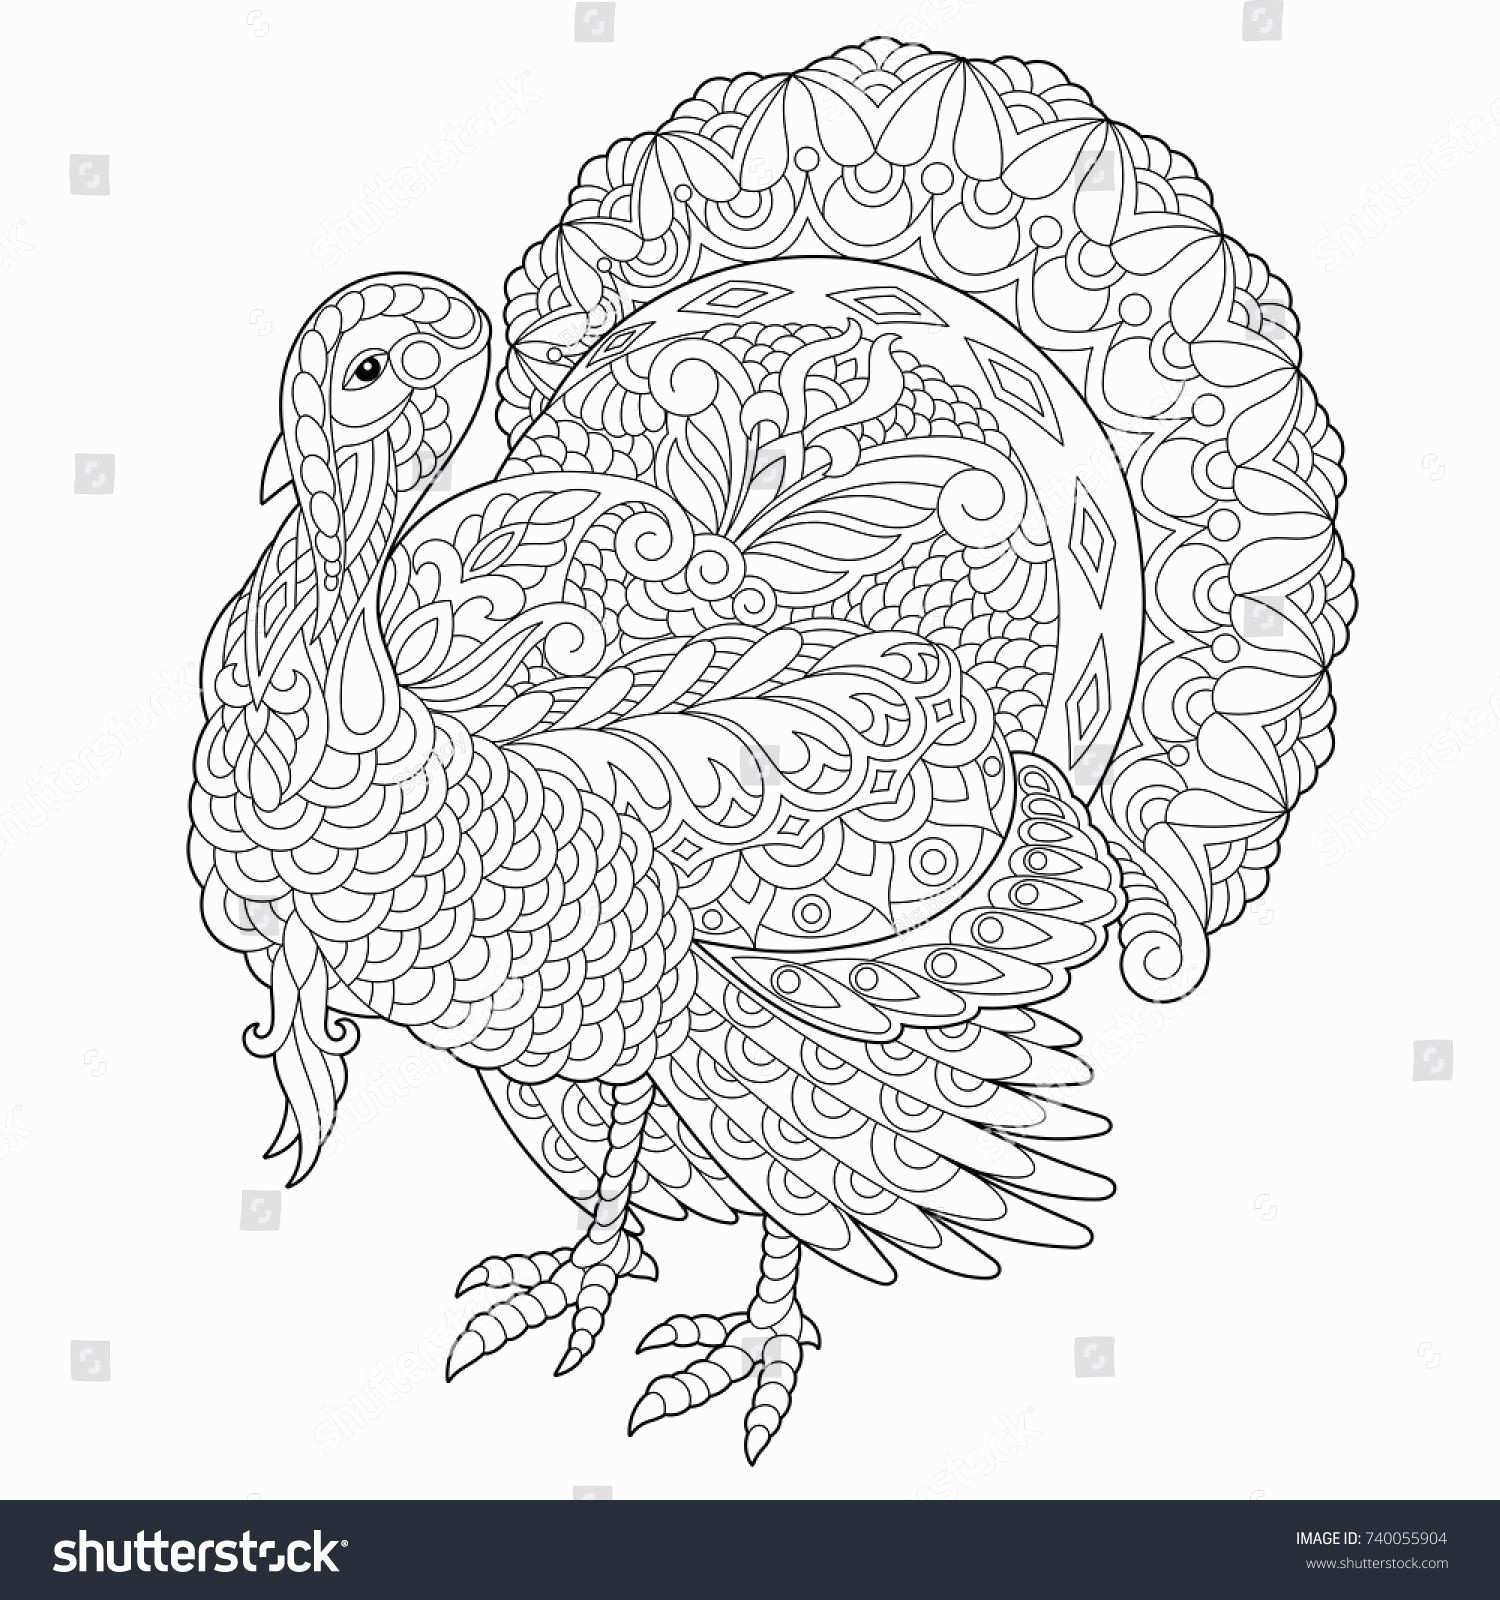 Preschool Turkey Coloring Pages Coloring Ideas Thanksgiving Coloring Pages For Adults Fresh Simple